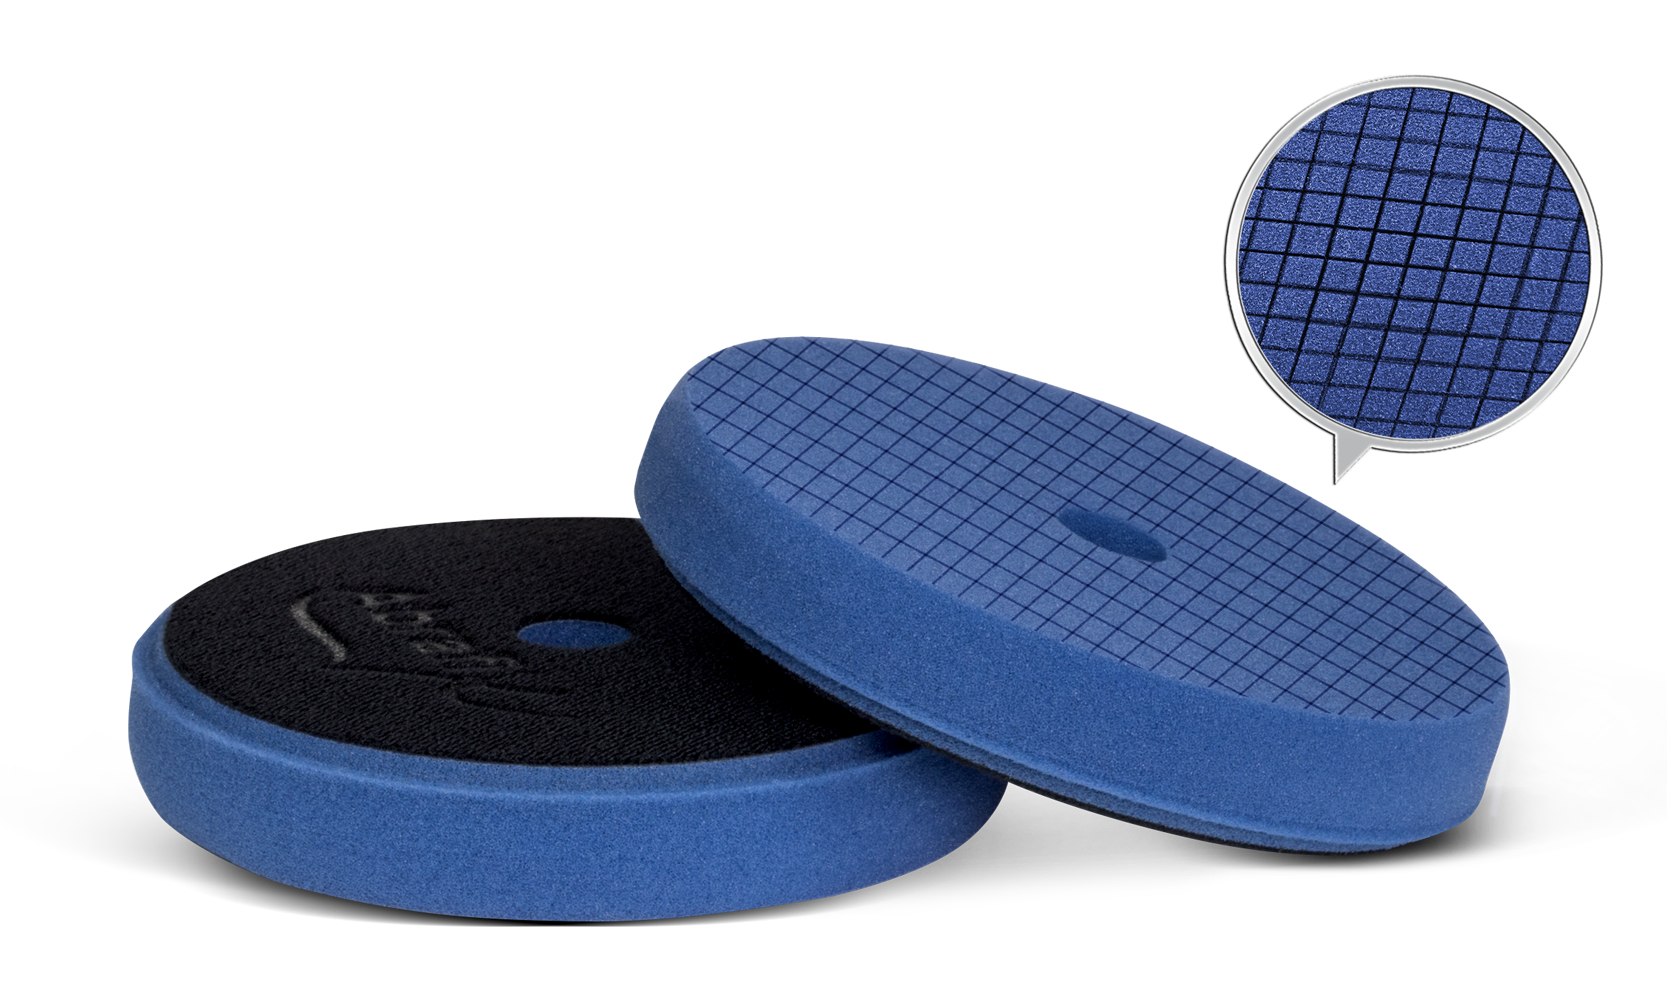 SpiderPad navy-blue m 145/25 mm